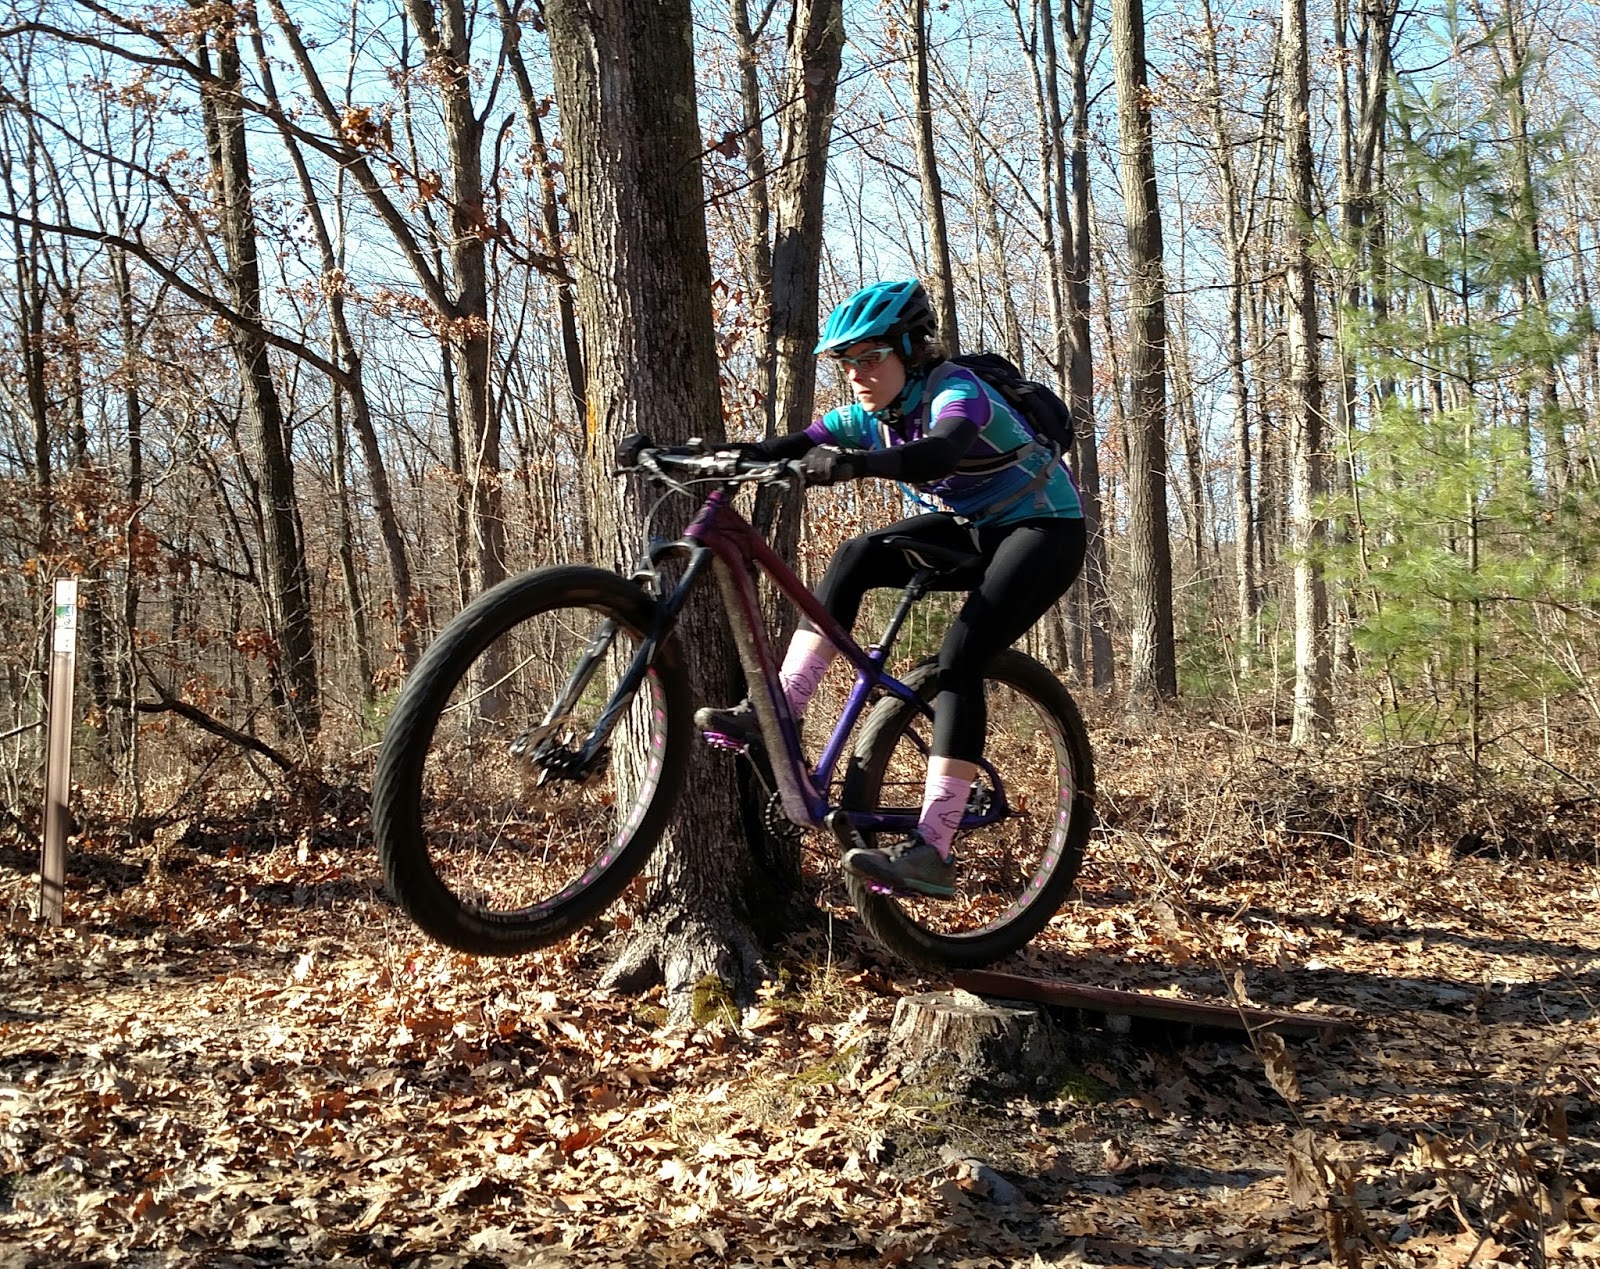 Josie's Bike Life: Experiencing Growth as a Fearless Woman of Dirt